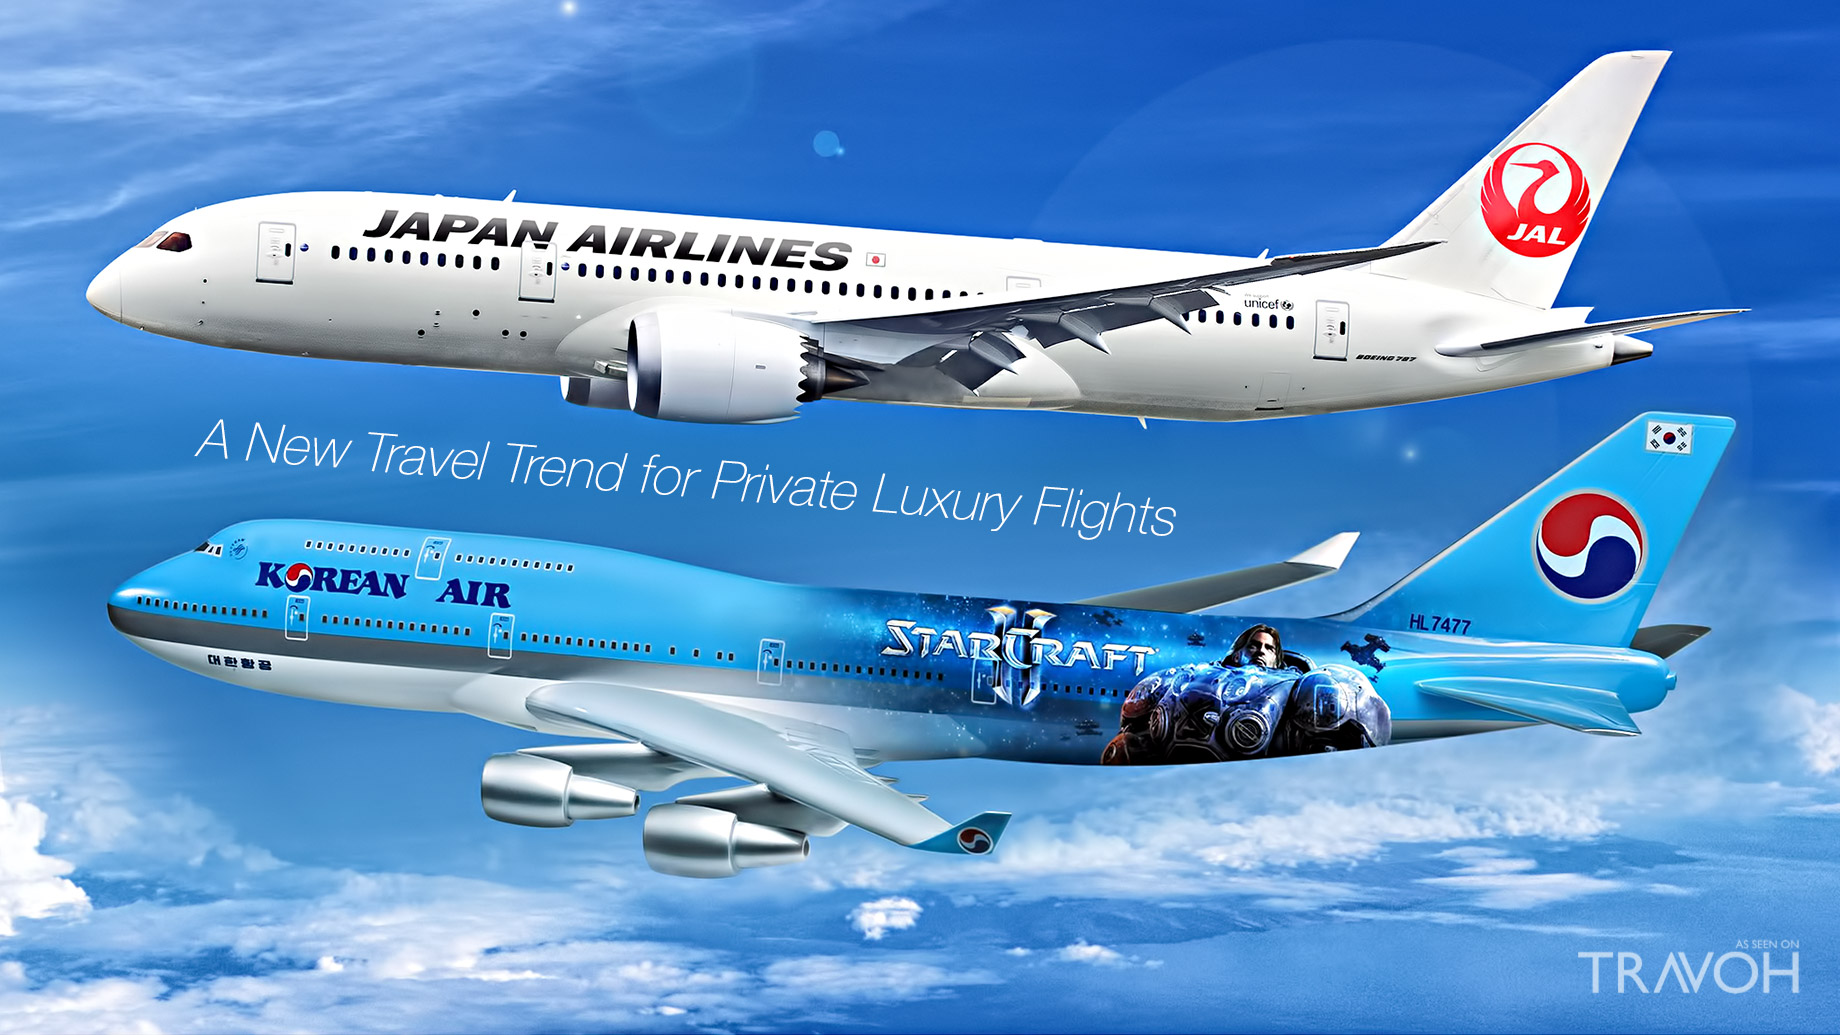 Japan Airlines and Korean Air - A New Travel Trend for Private Luxury Flights